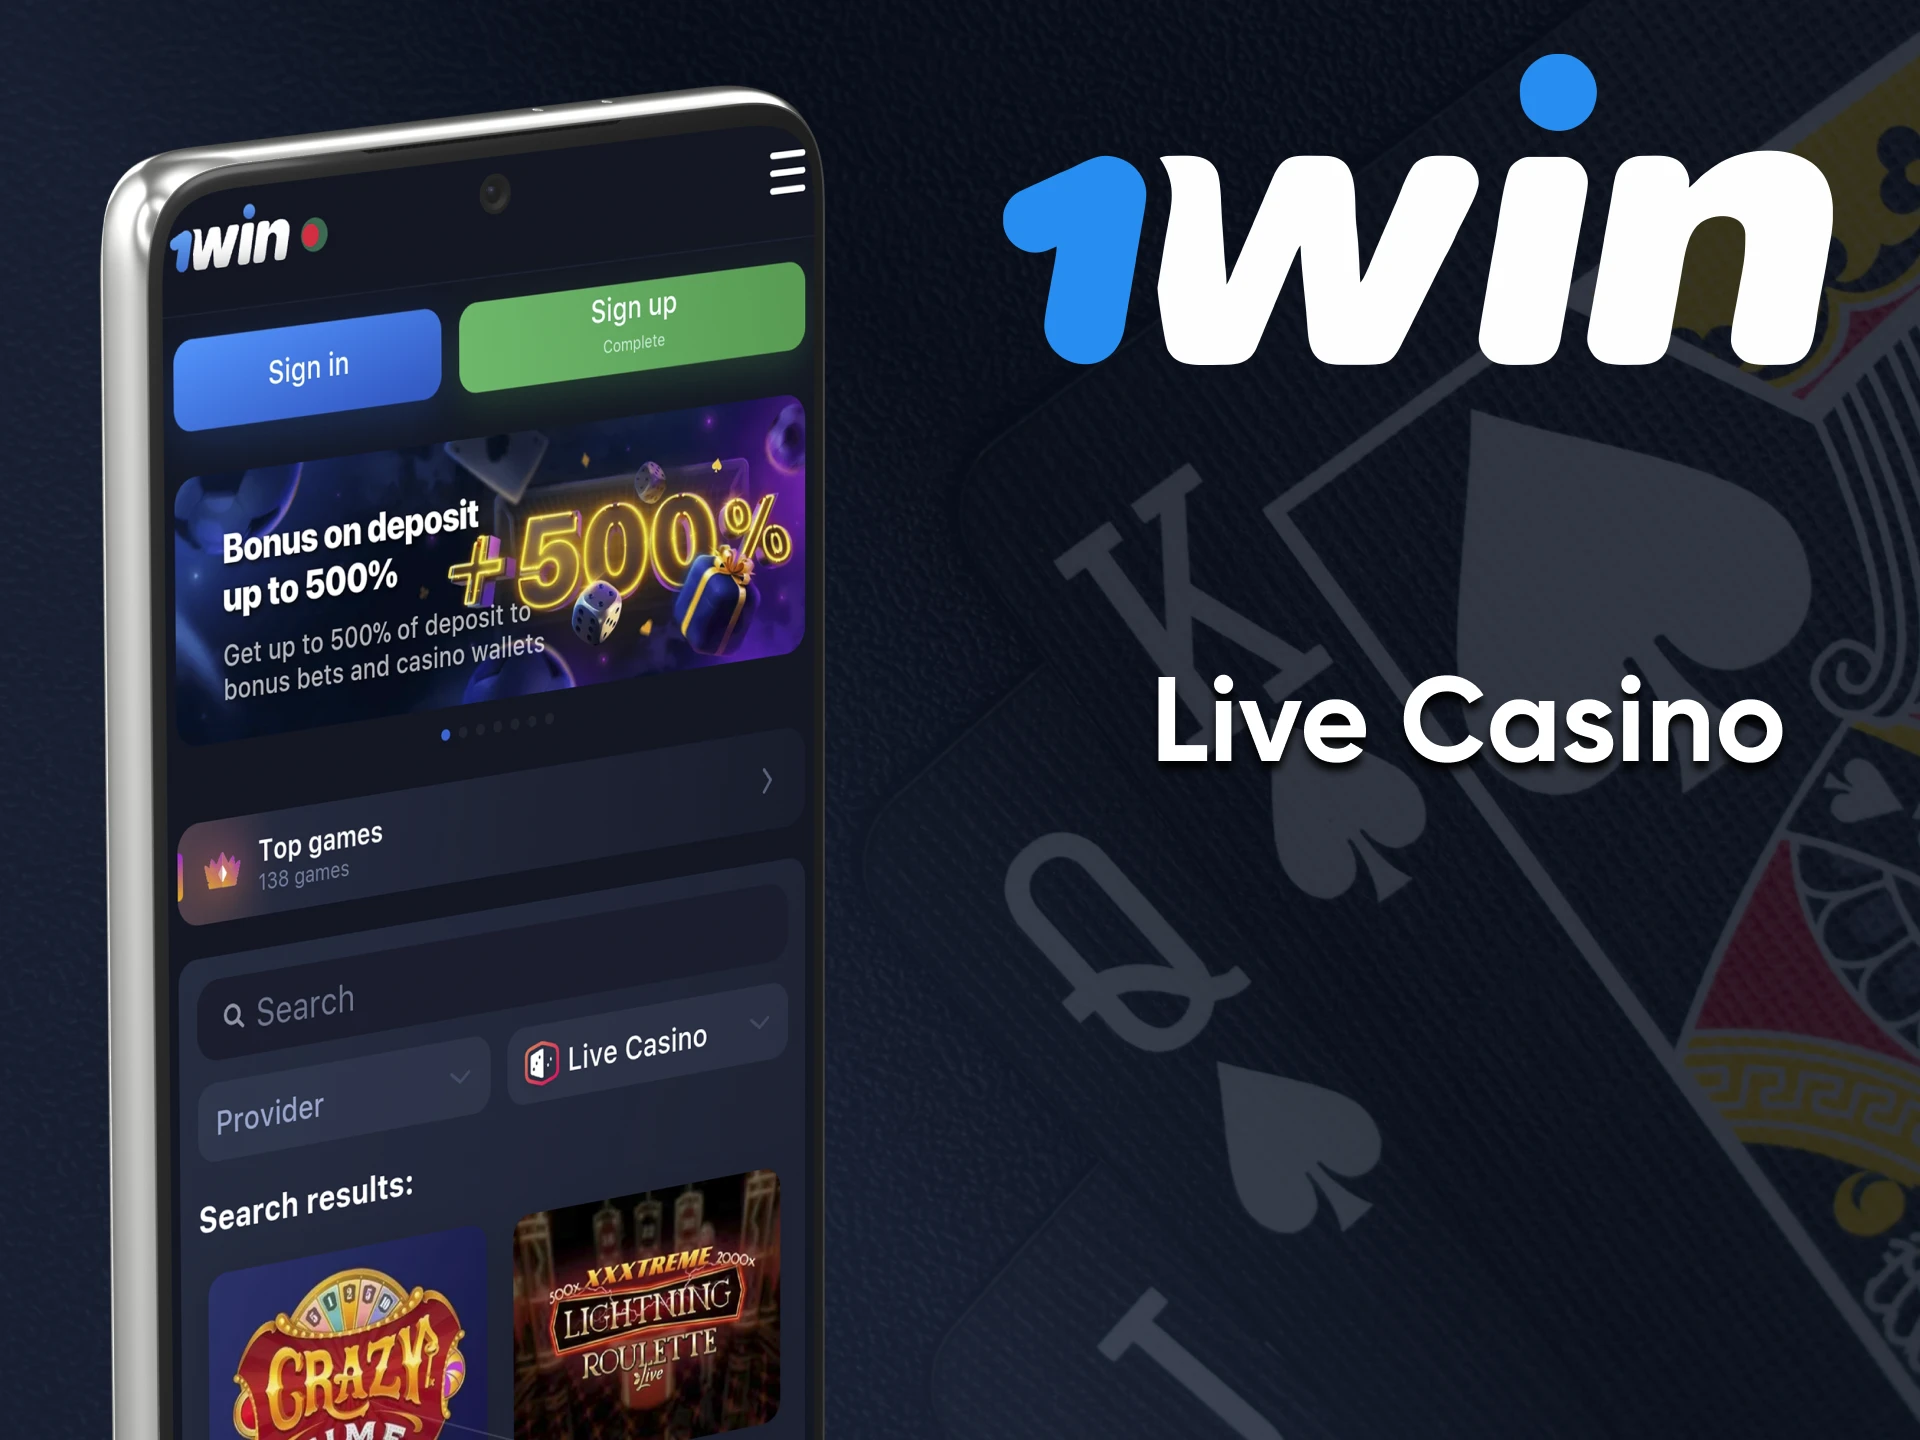 On the 1win service you can play in the live-casino.